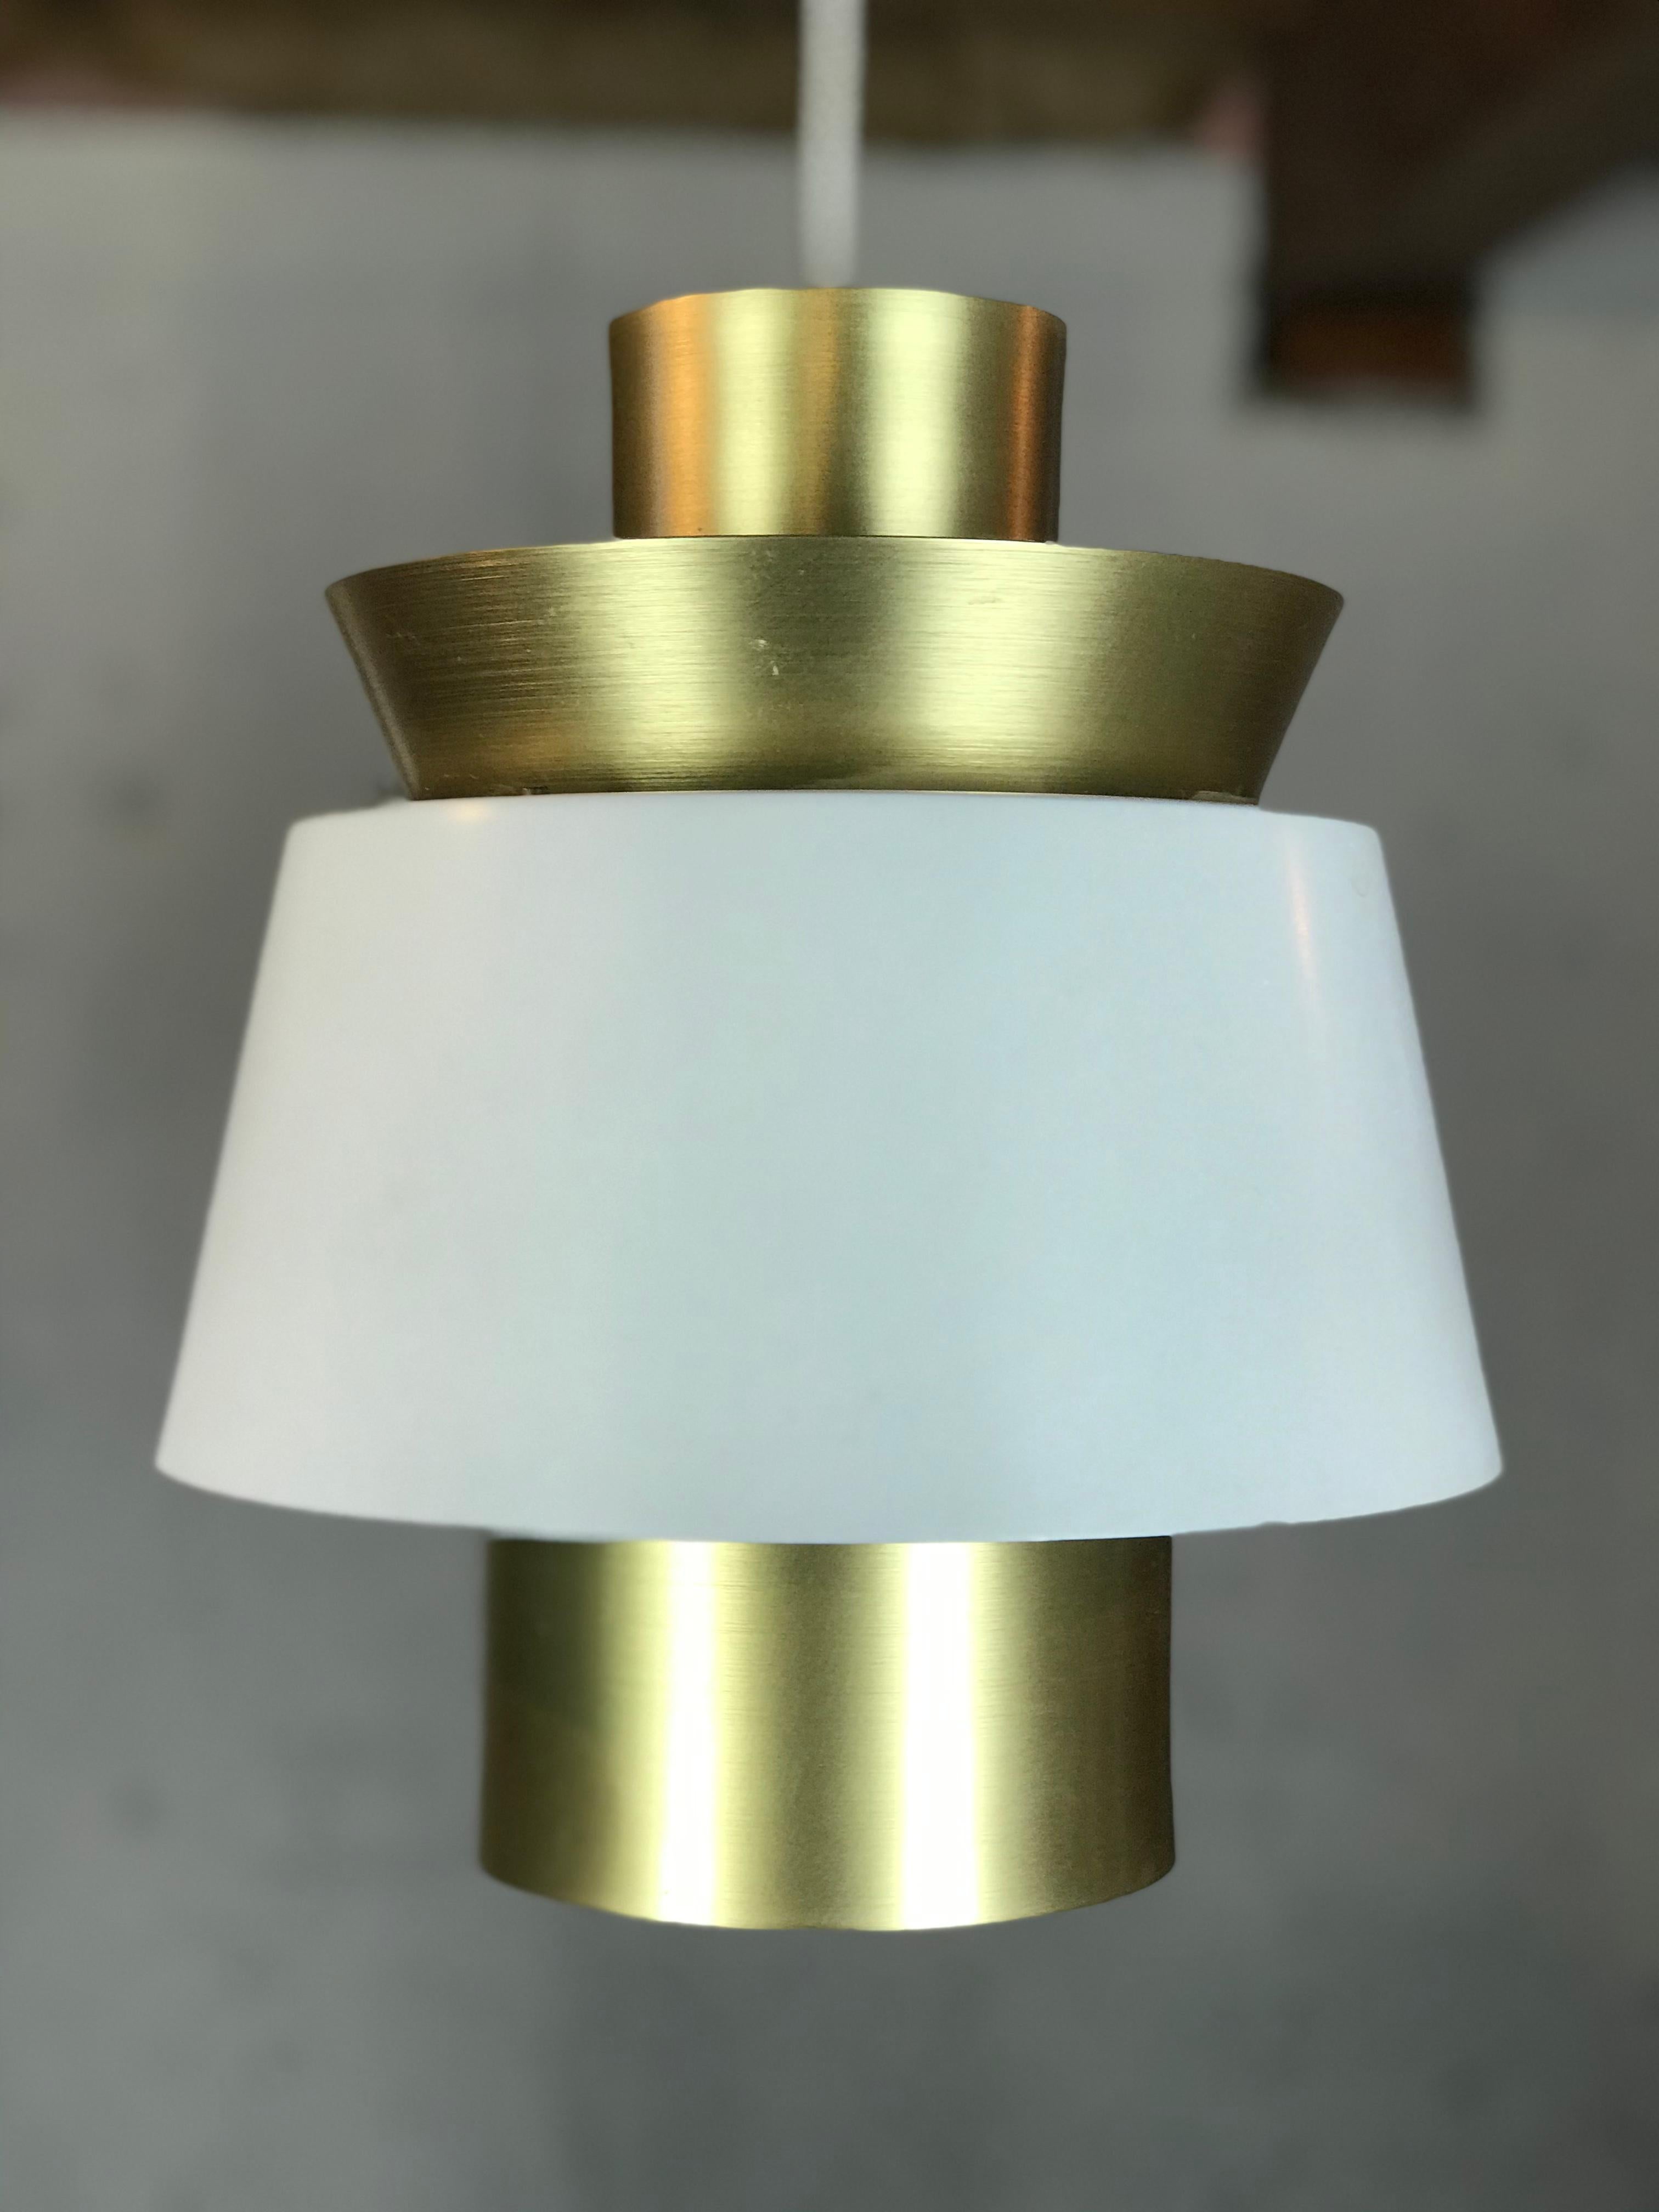 Plated Pendant Lamps in Brass and Painted Metal by Jorn Utzon for Nordisk Solar 